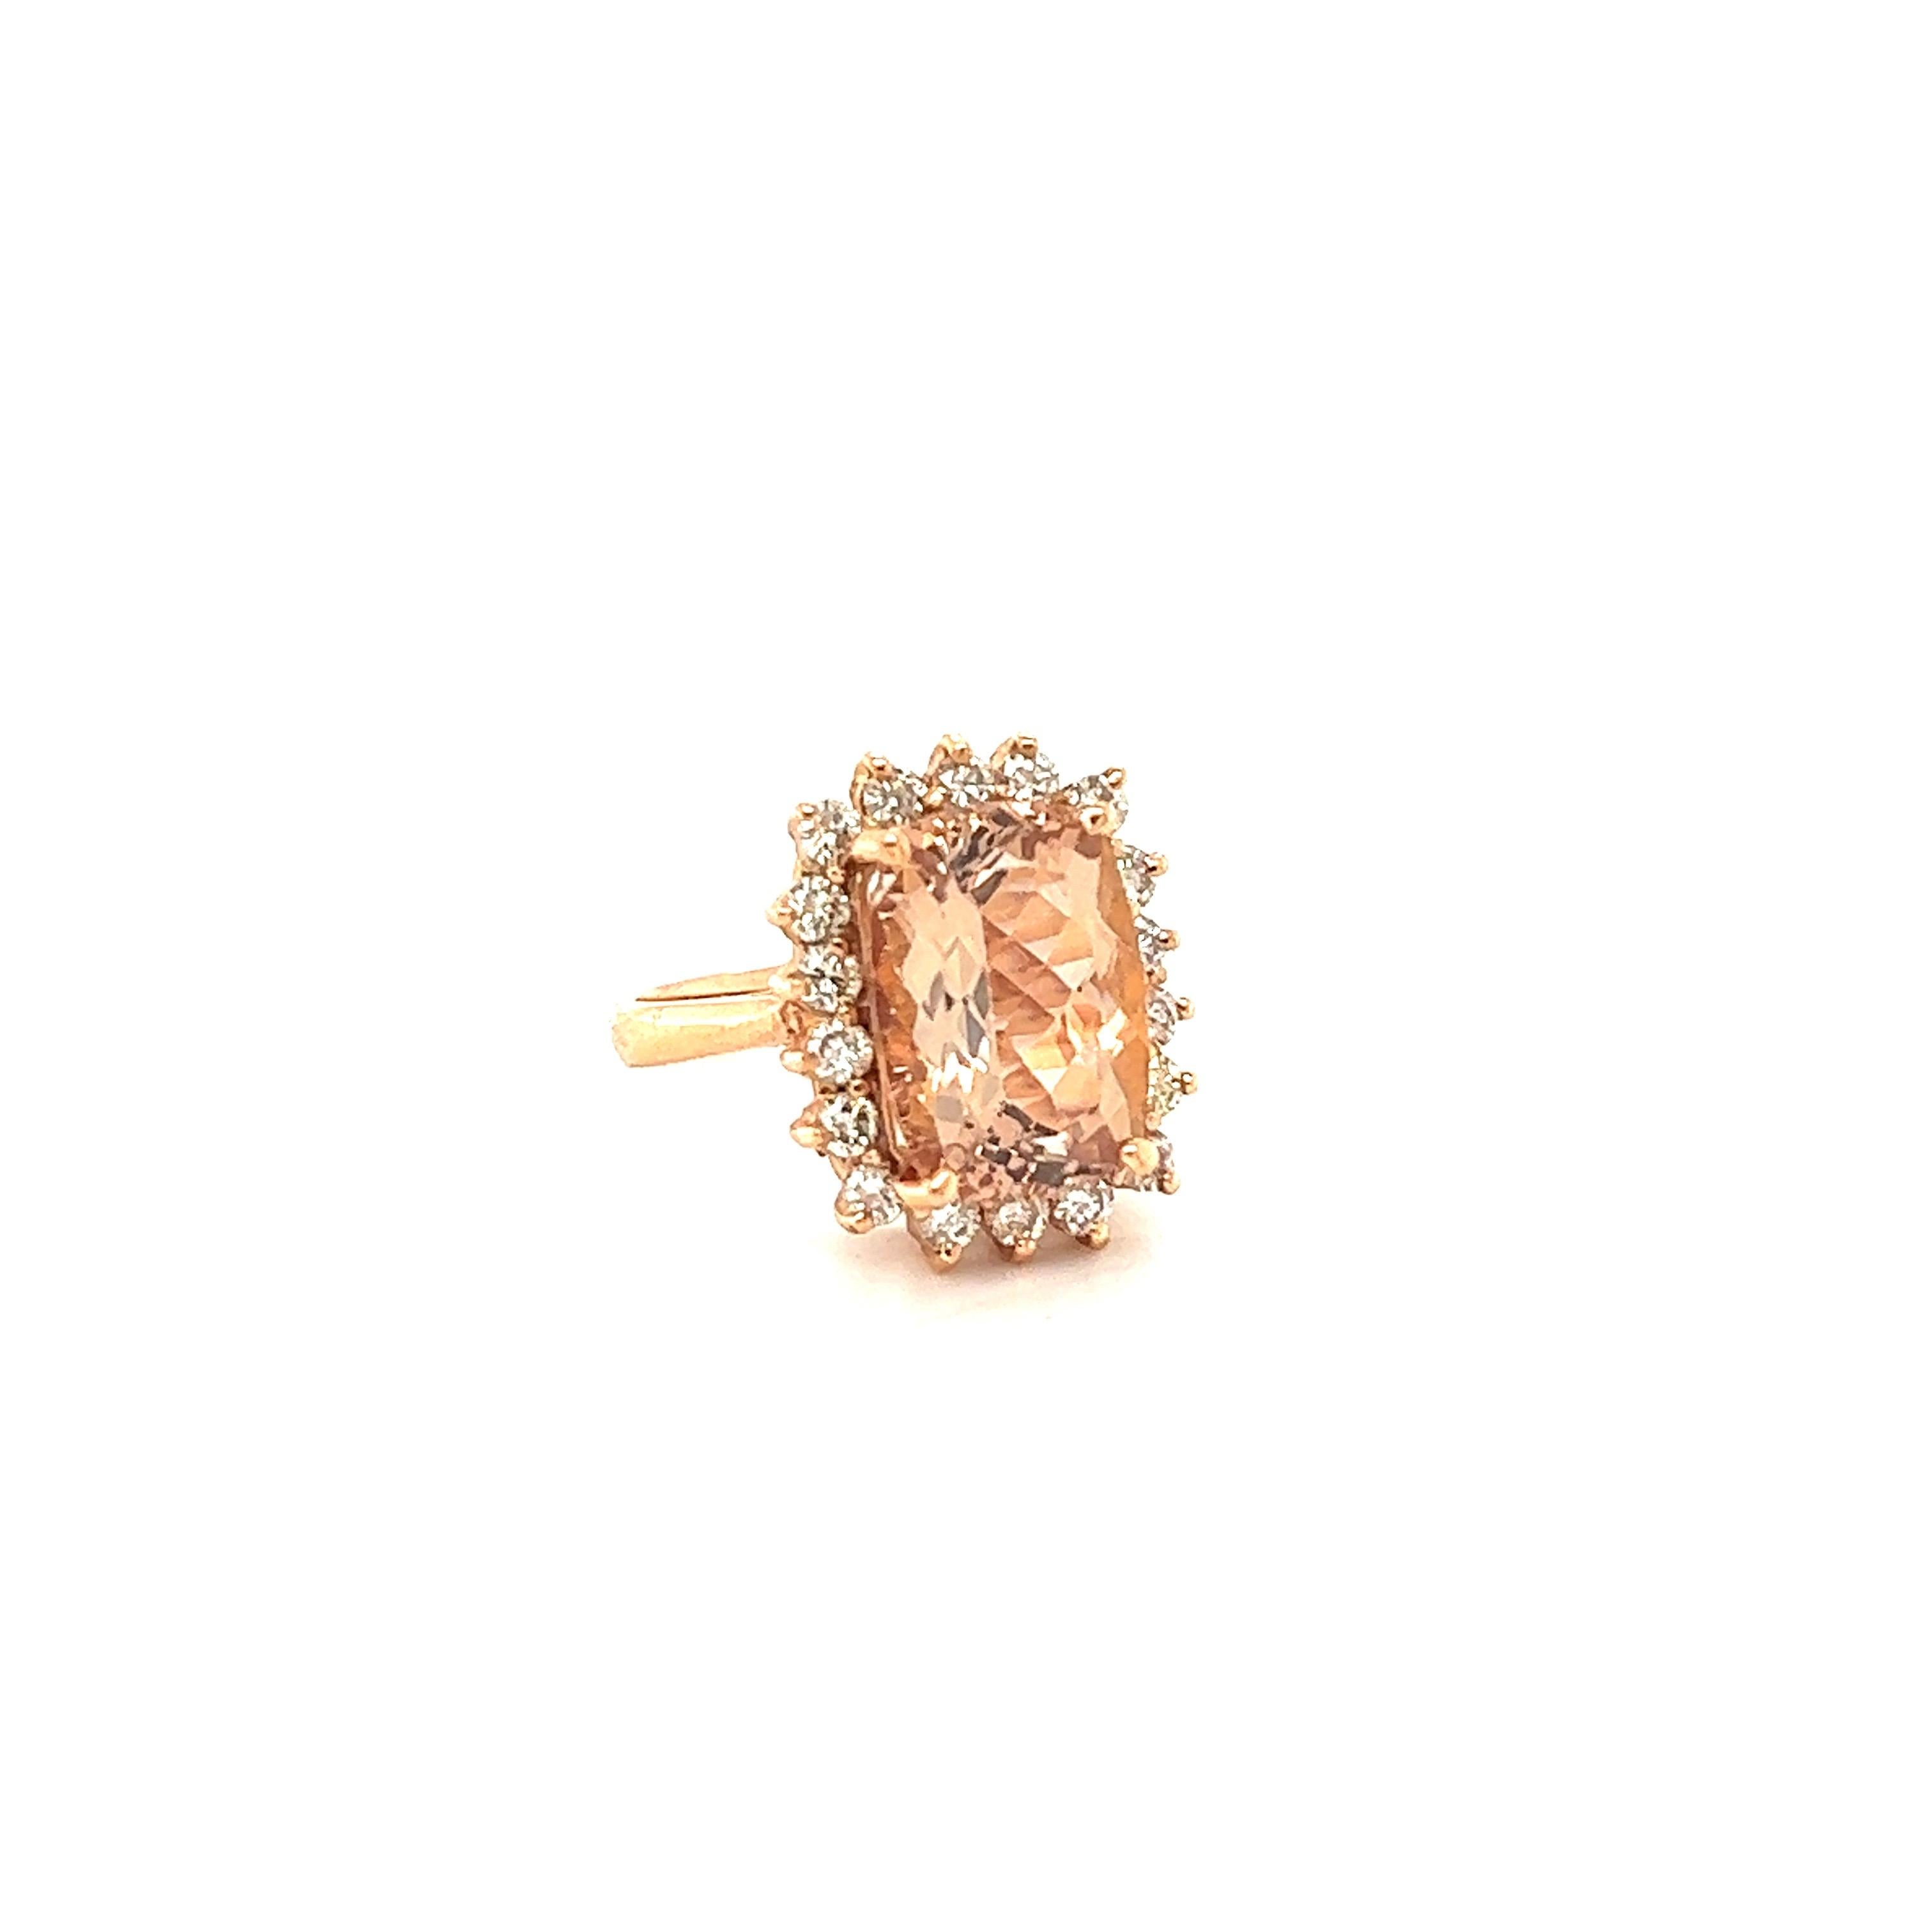 Statement Morganite Diamond Ring! 

This ring has a 6.19 Carat Natural Emerald Cut Morganite that measures at 13 mm x 10 mm and is surrounded by 18 Round Cut Diamonds that weigh 0.82 Carats. The total carat weight of the ring is 7.01 Carats.  

The